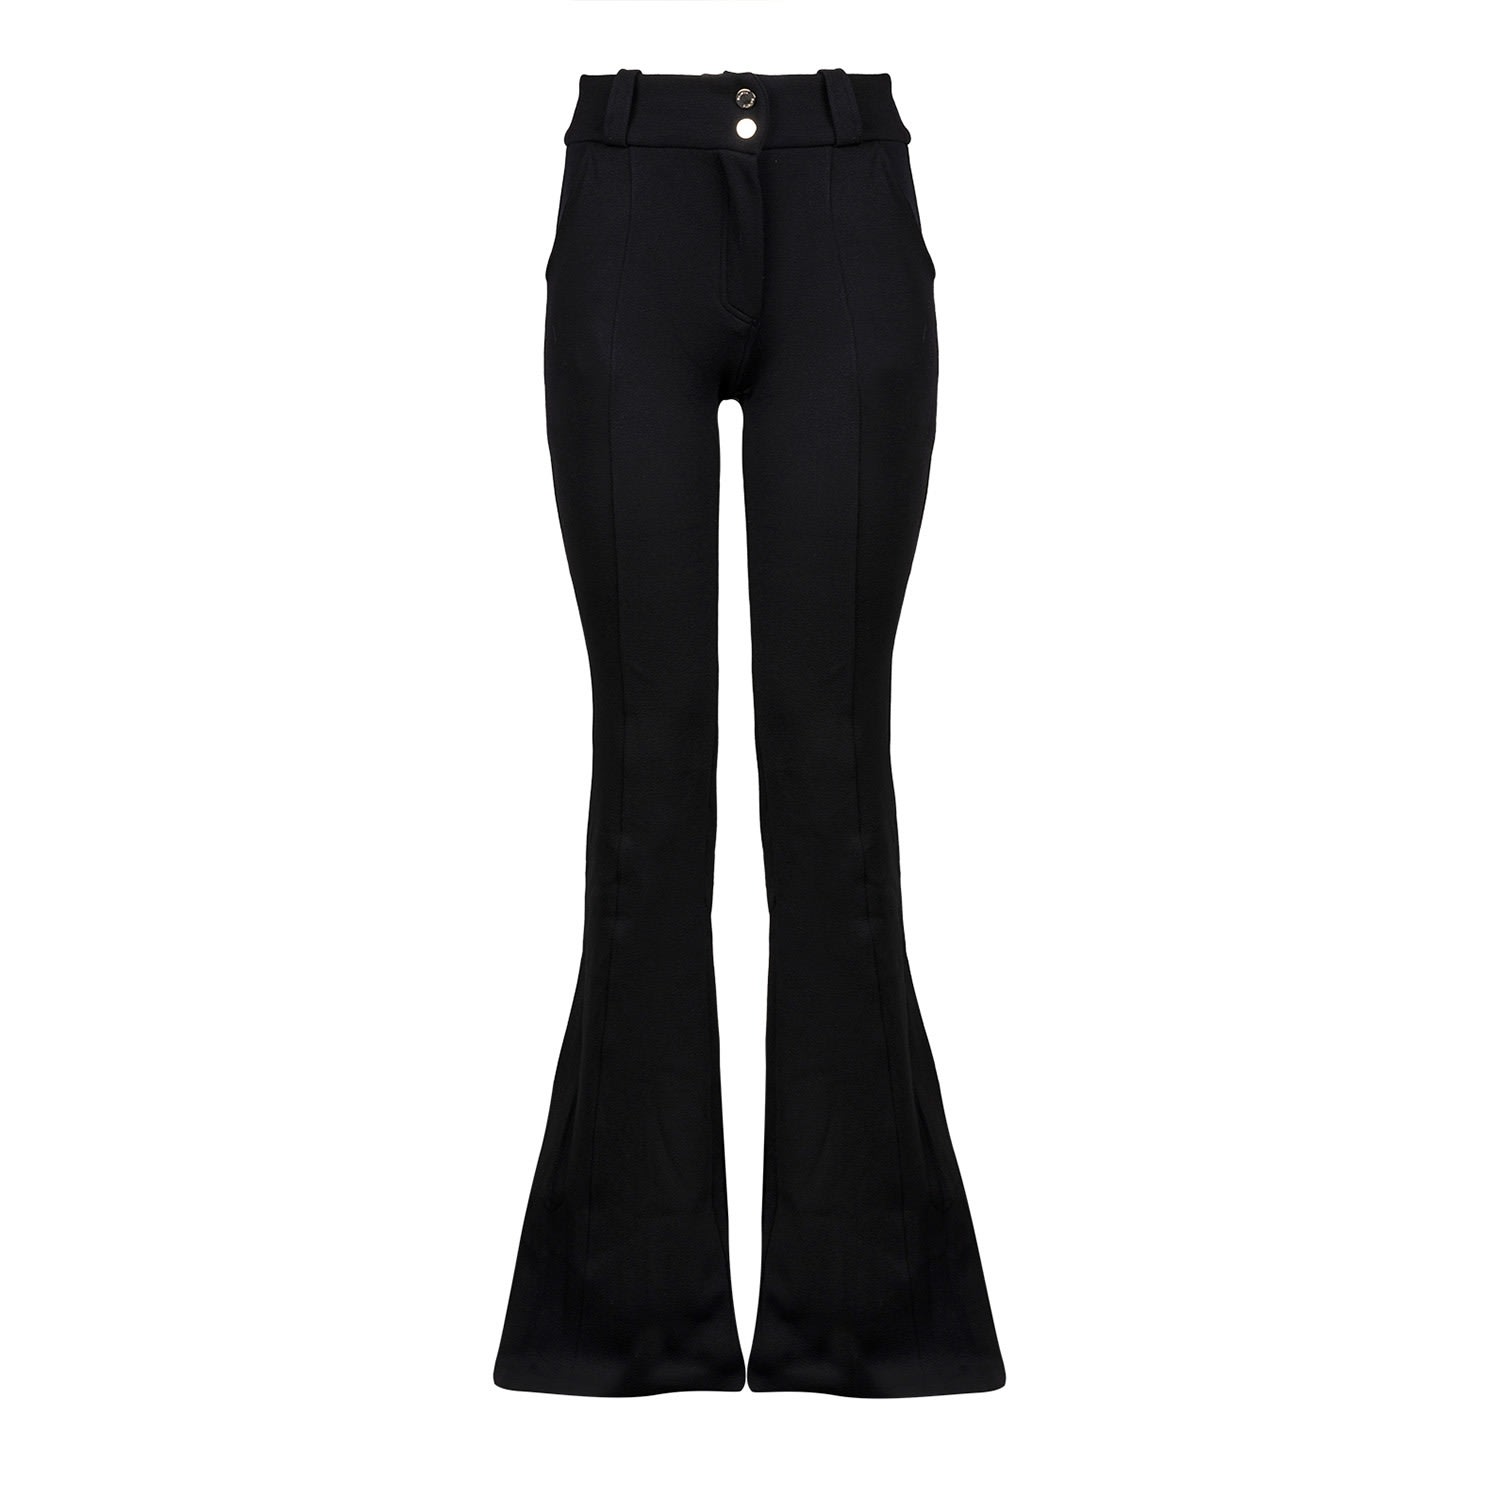 Women’s Classic Flare Pants Nero Black Extra Small Balletto Athleisure Couture